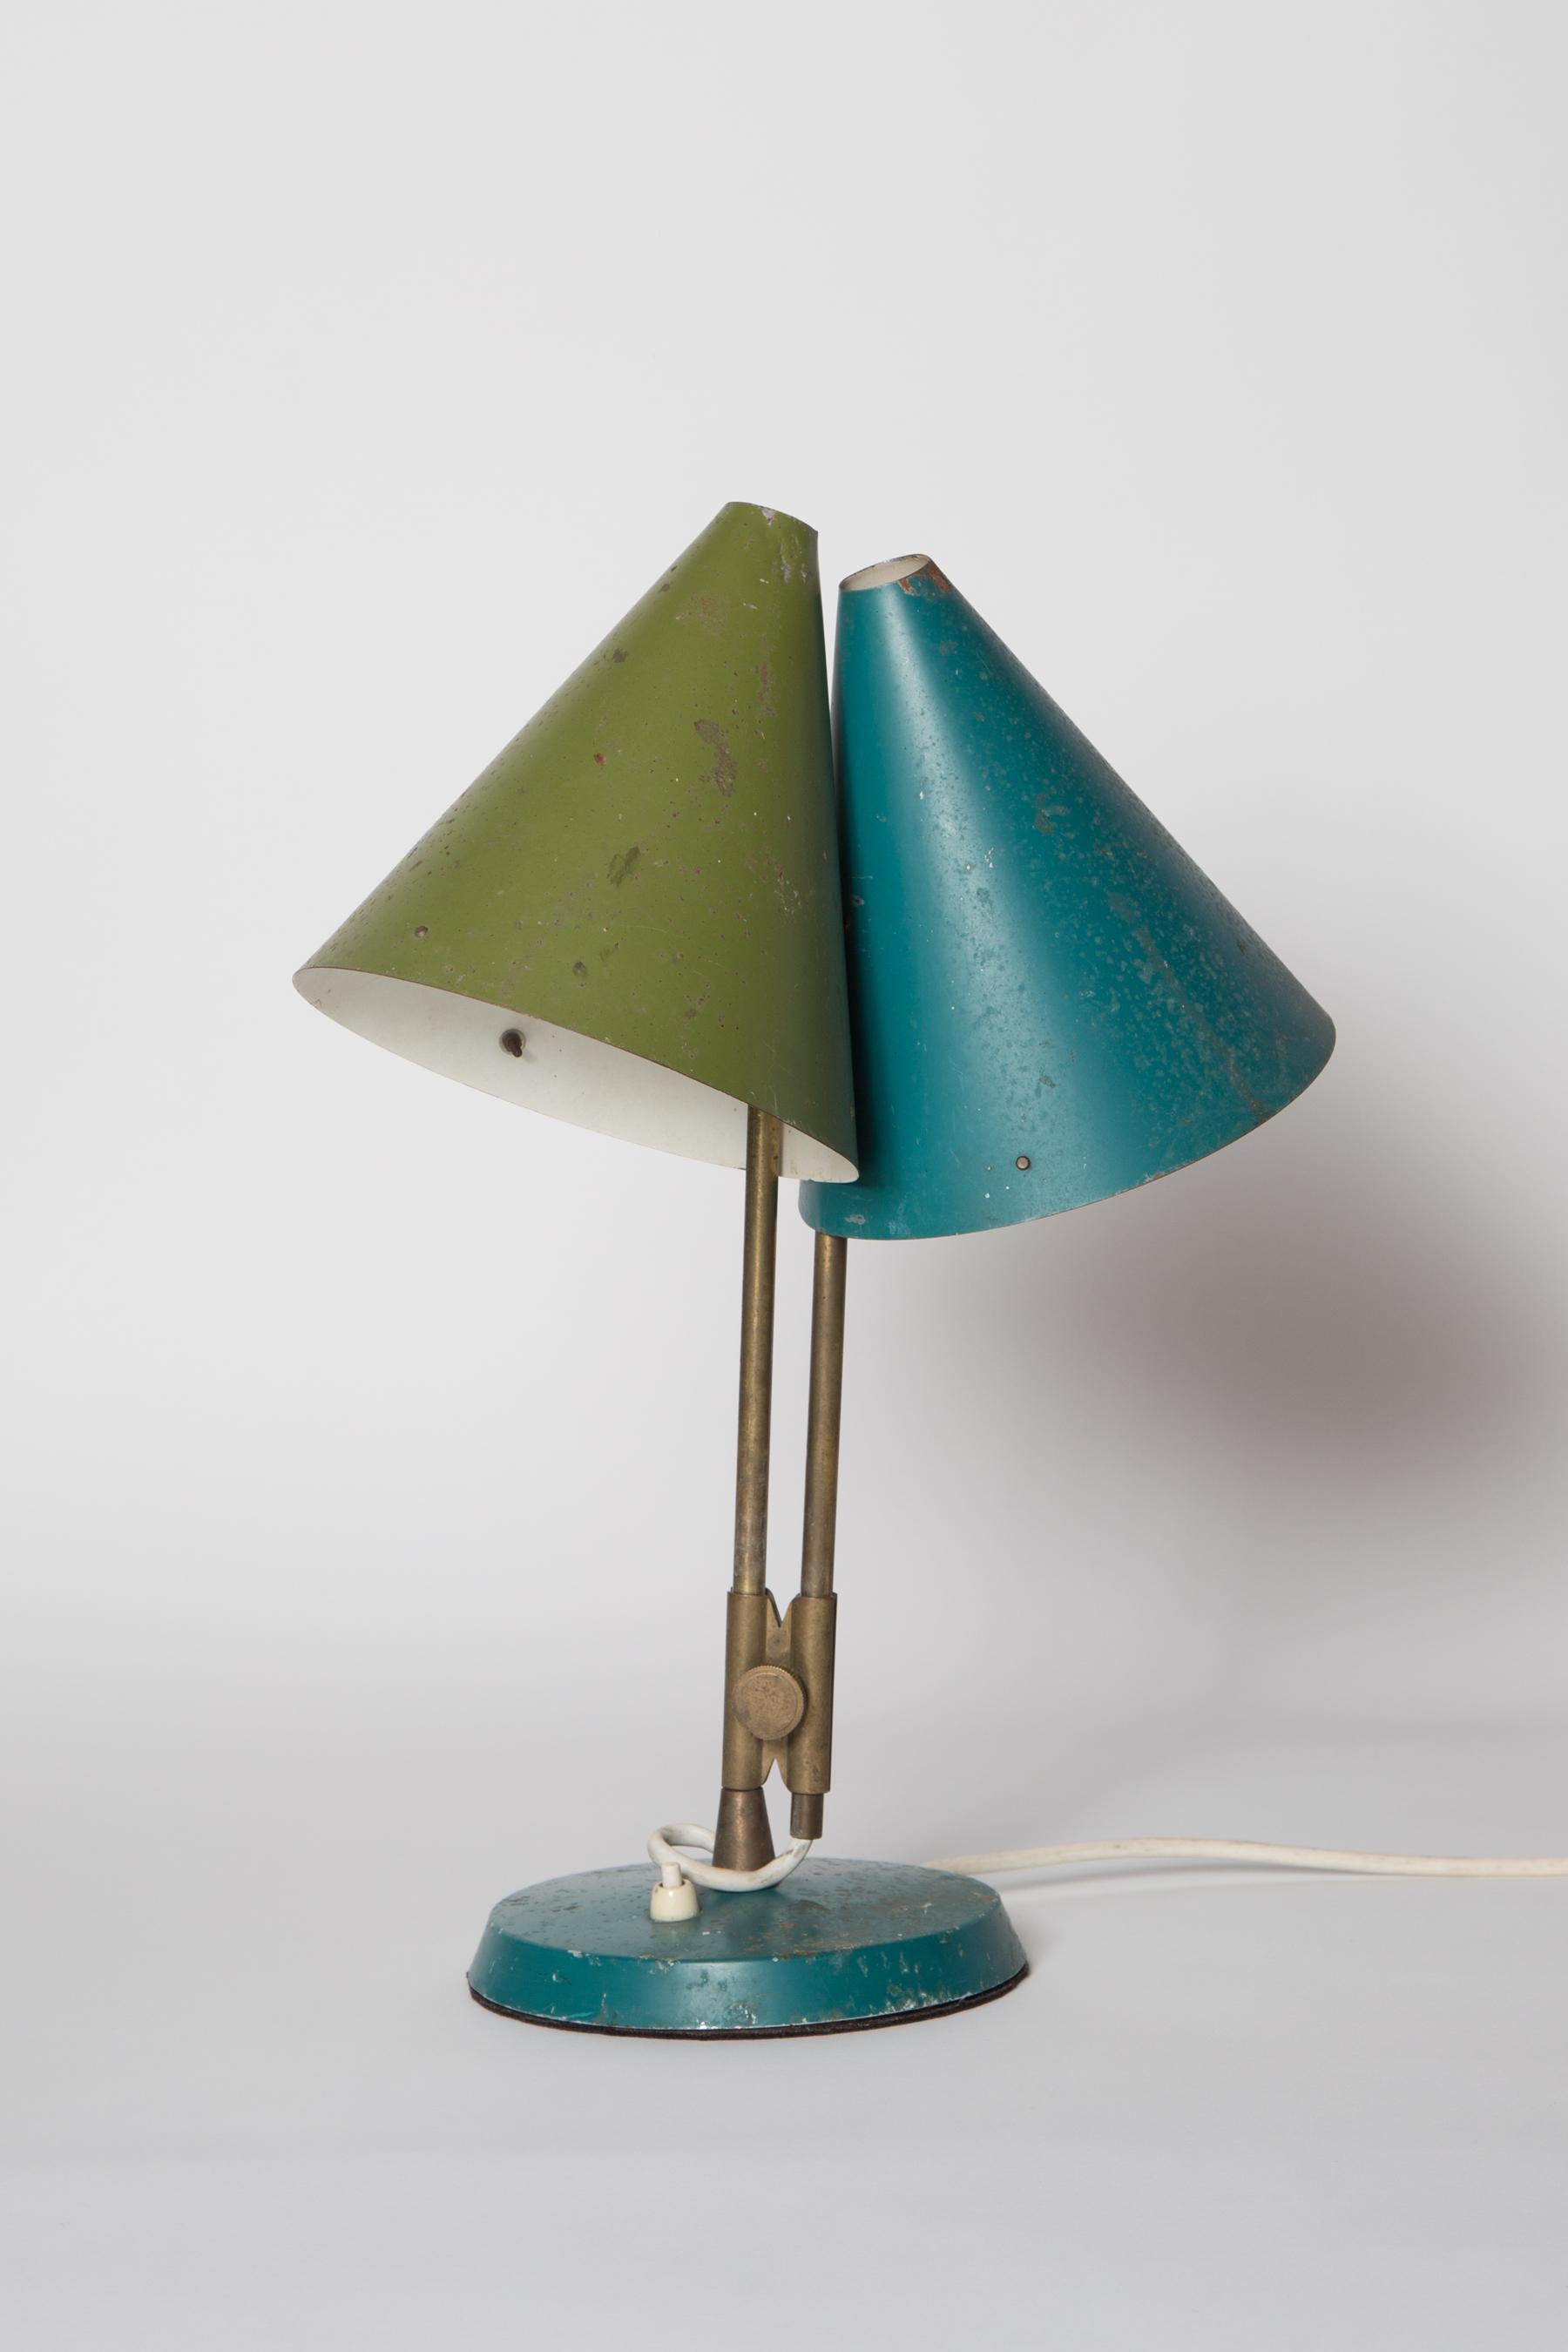 1959 Bent Karlby 'Mosaik' Adjustable Brass & Lacquered Metal Table Lamp for Lyfa 12